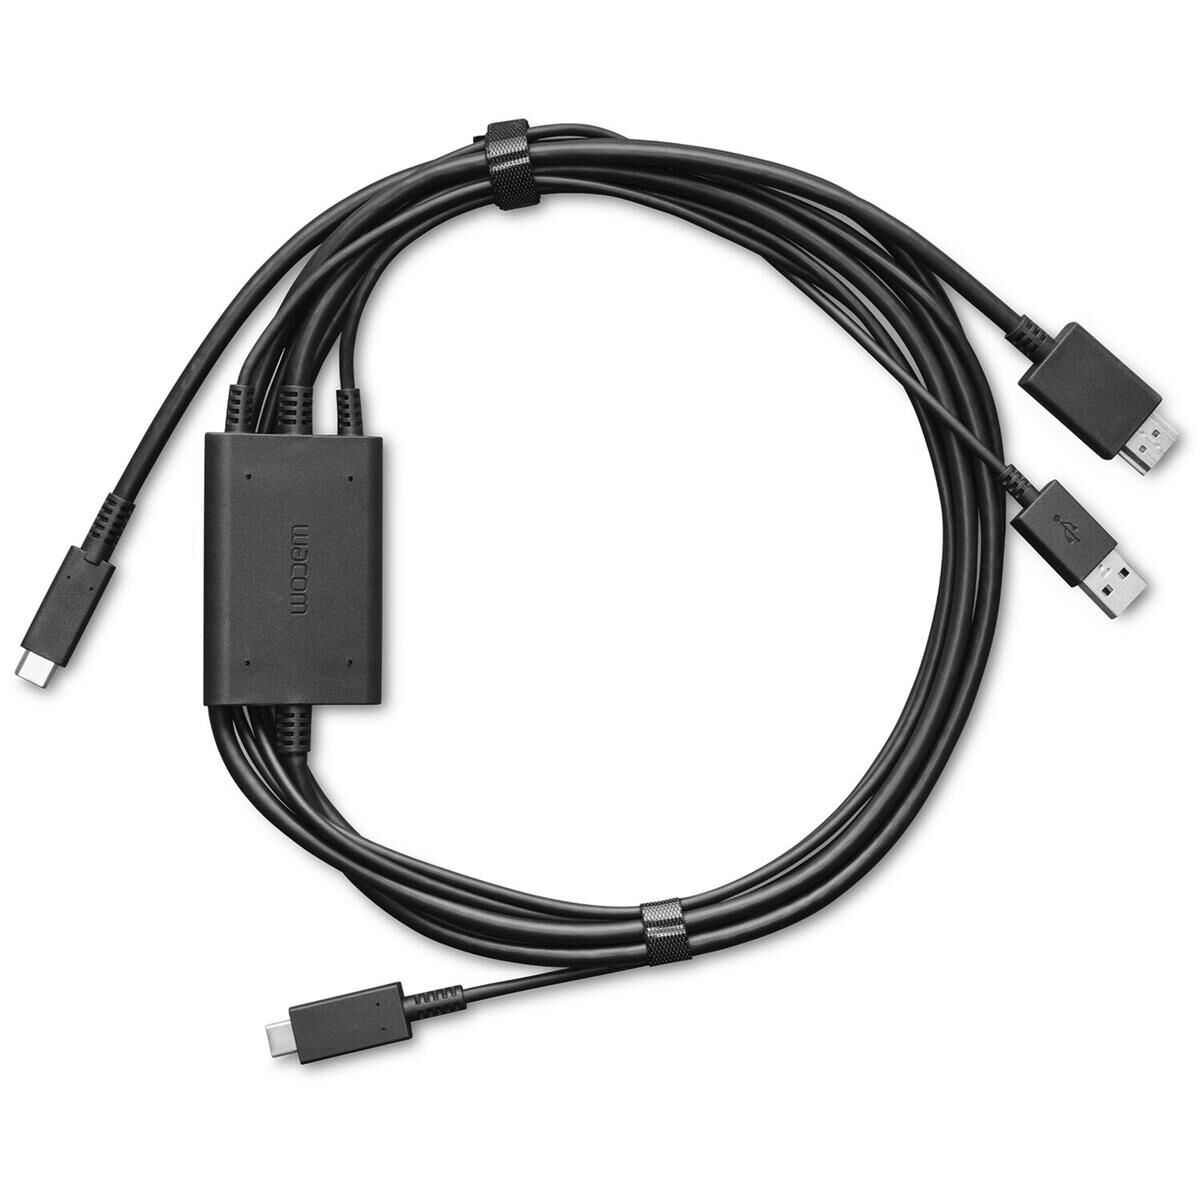 Wacom 3-In-1 Cable for One 12/13 Touch Display, Black